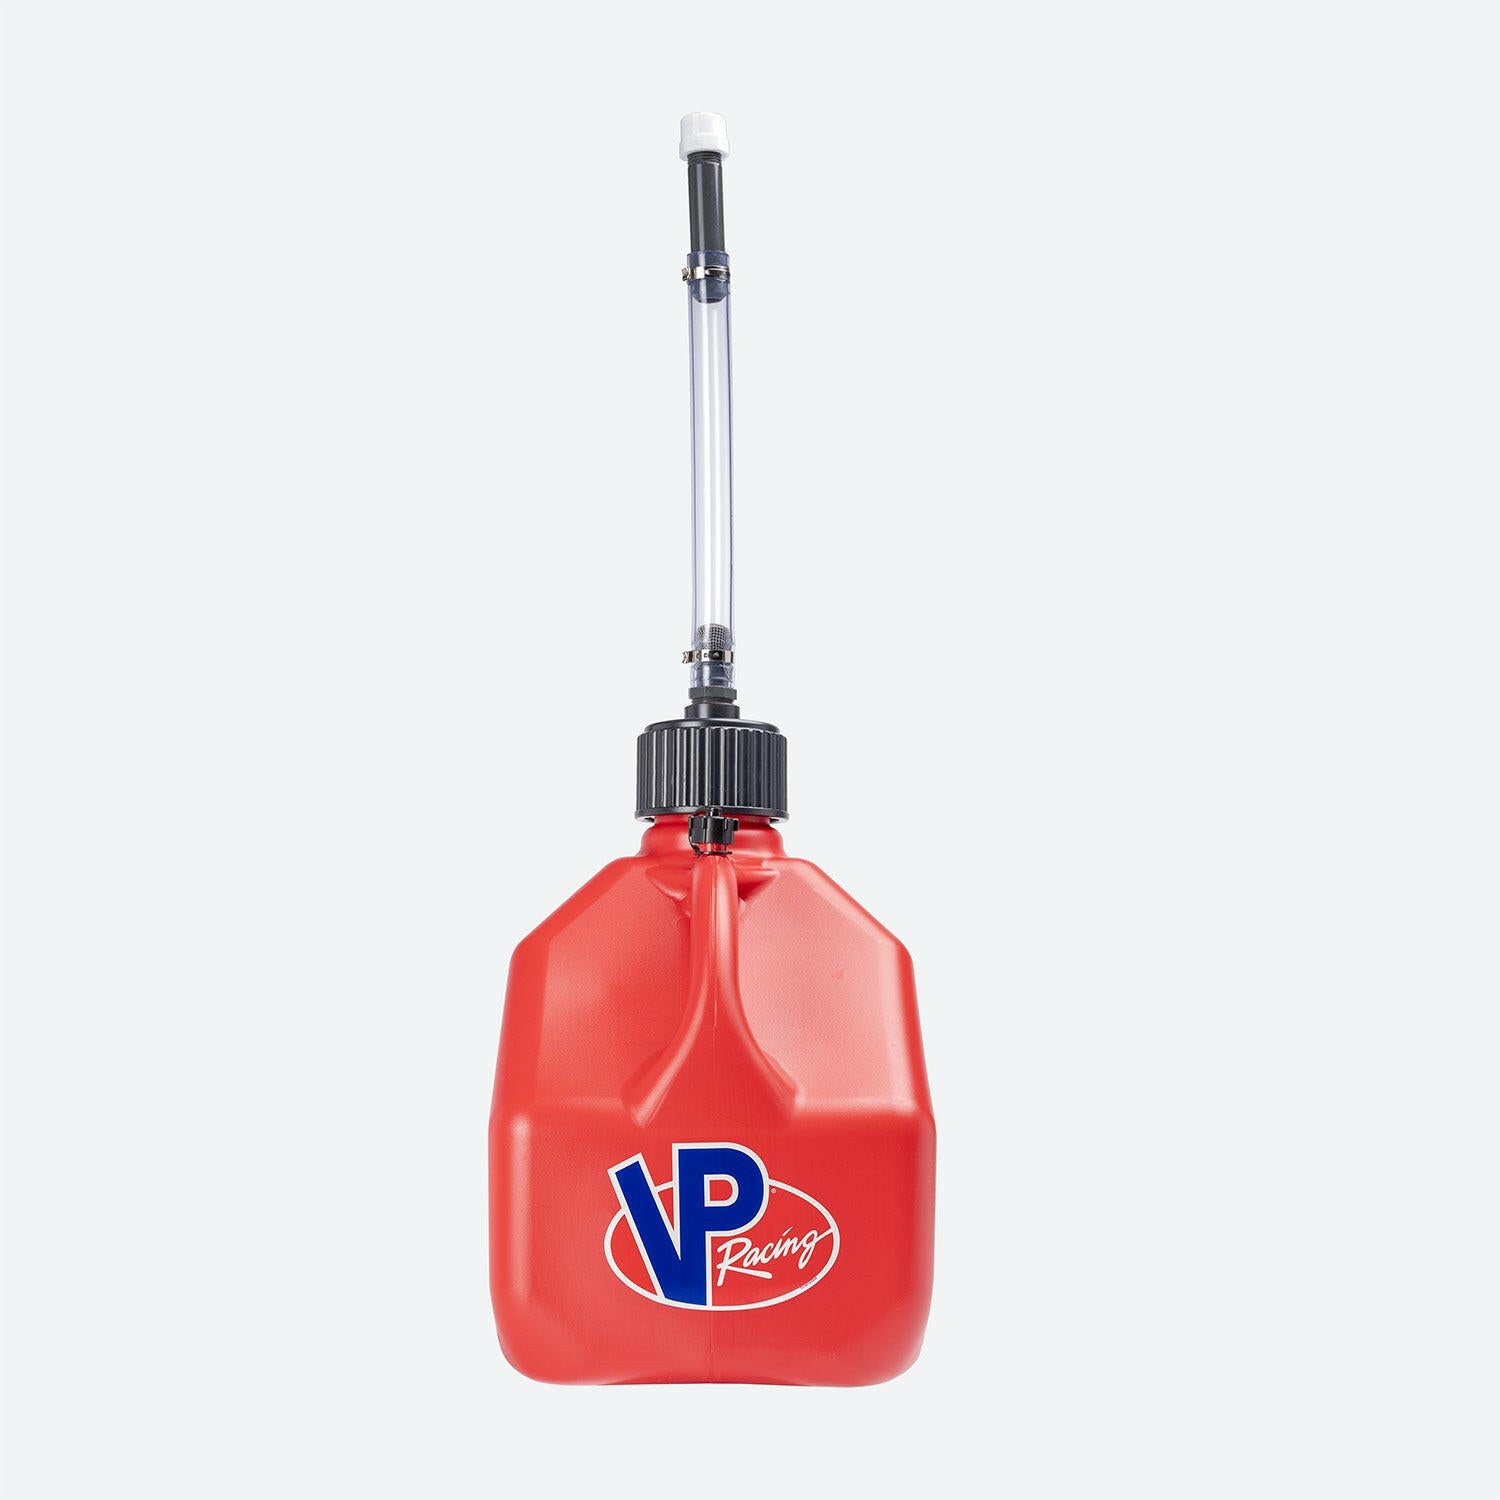 A PPF 3-Gallon Motorsport Container® – Square With Deluxe Hose made of durable red plastic with a black screw-on cap and a clear cylindrical spout with a black fitting. The jug, featuring an ergonomic handle, proudly displays the "VP Racing" logo in blue, white, and red on the front. The background is plain white.